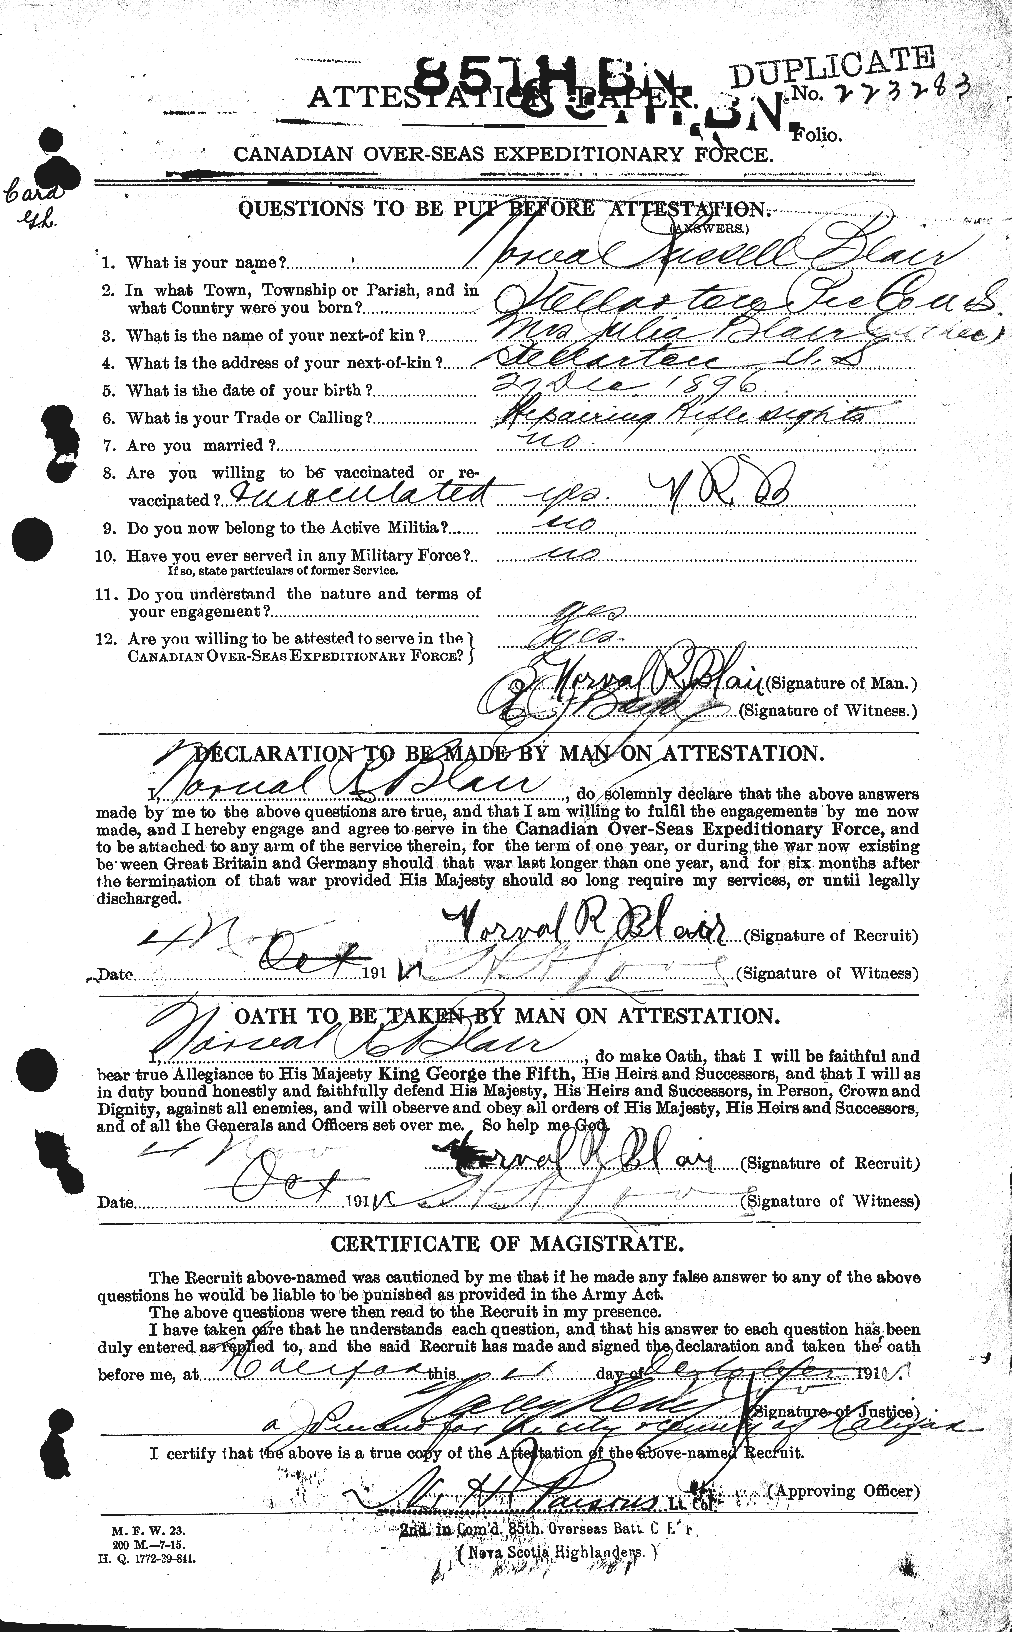 Personnel Records of the First World War - CEF 243120a